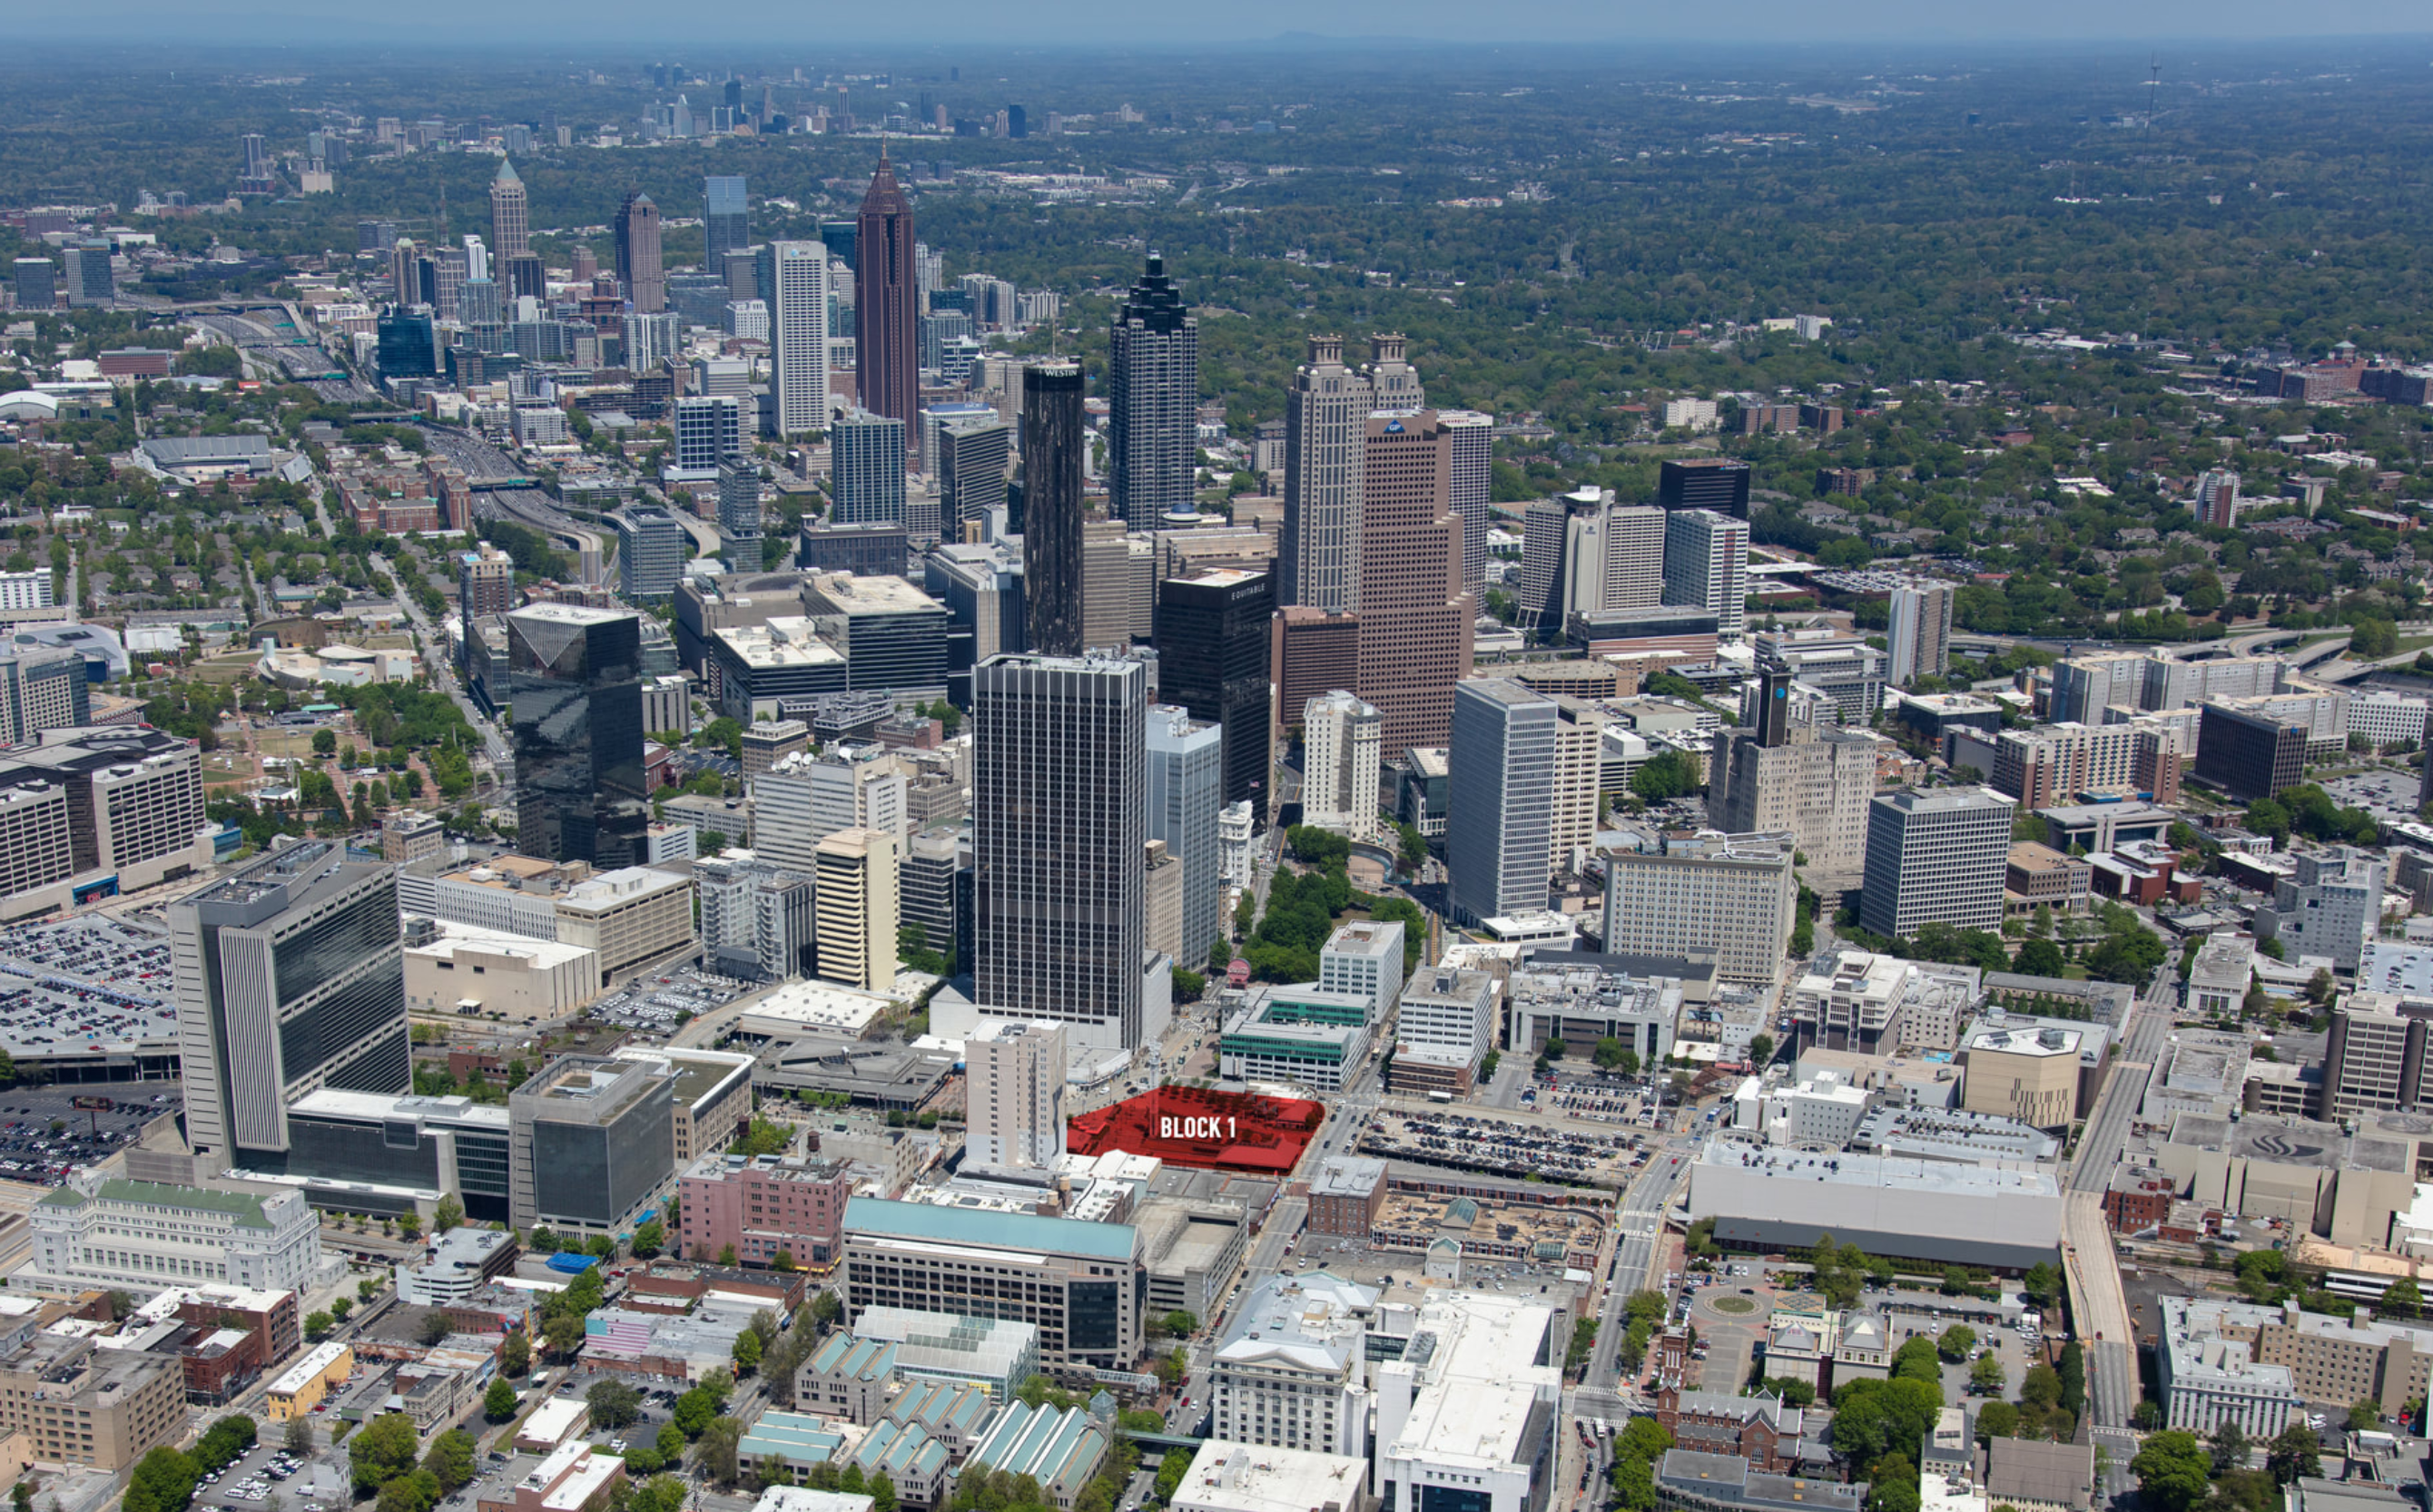 An aerial photo of the city, with Block One highlighted in red.